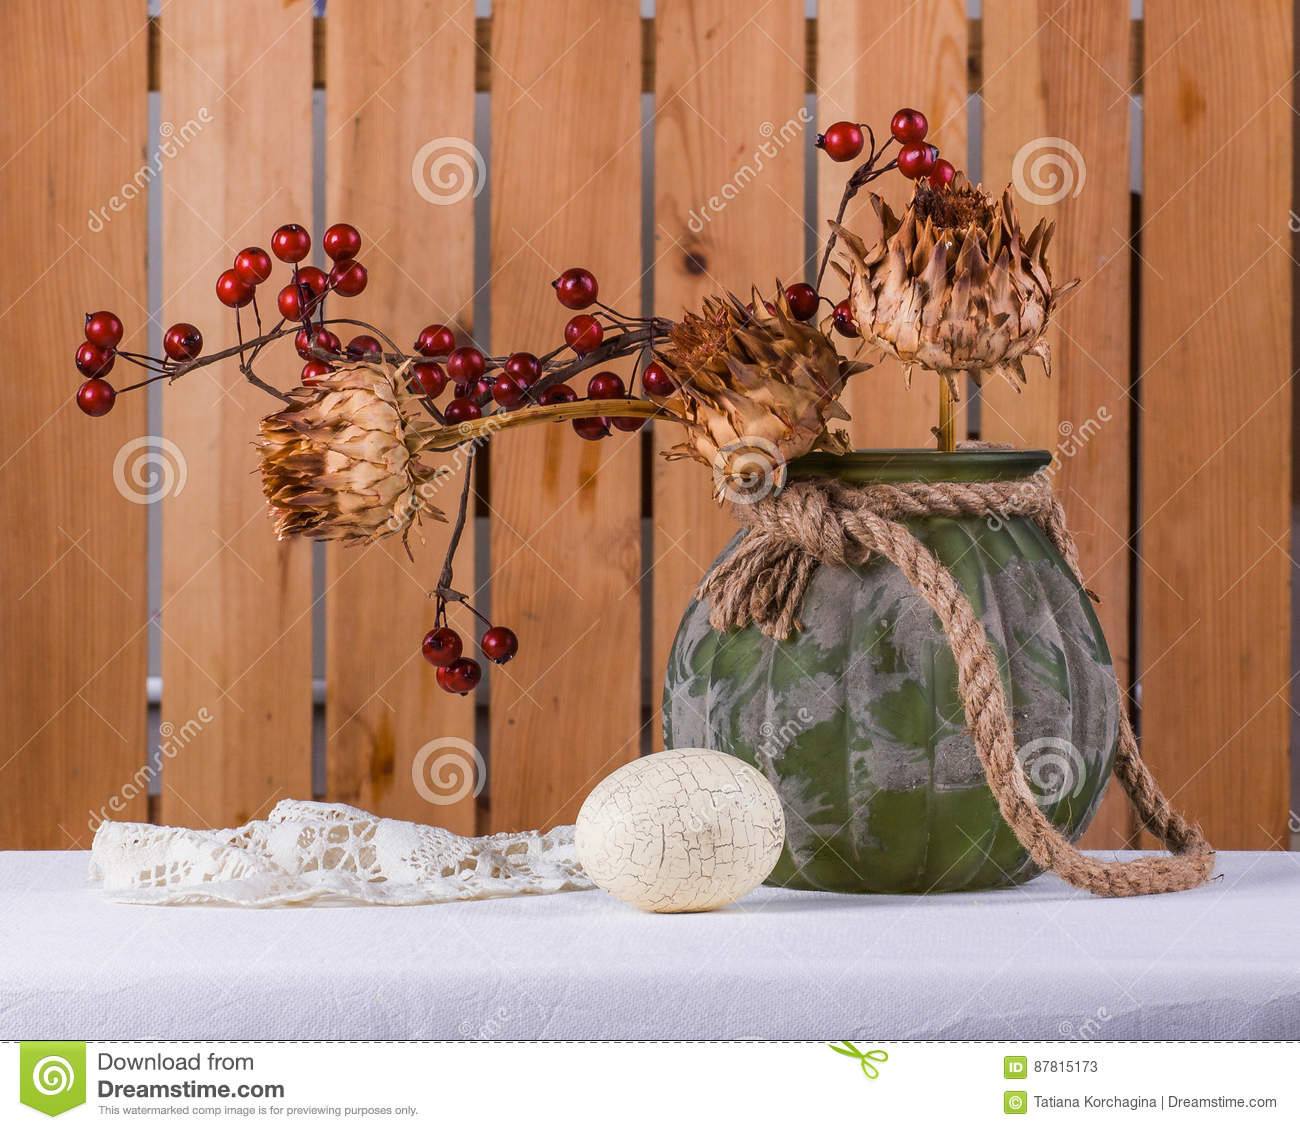 30 Unique Dried Twigs for Vases 2024 free download dried twigs for vases of easter provincial still life with egg on the wooden background intended for download easter provincial still life with egg on the wooden background stock image image